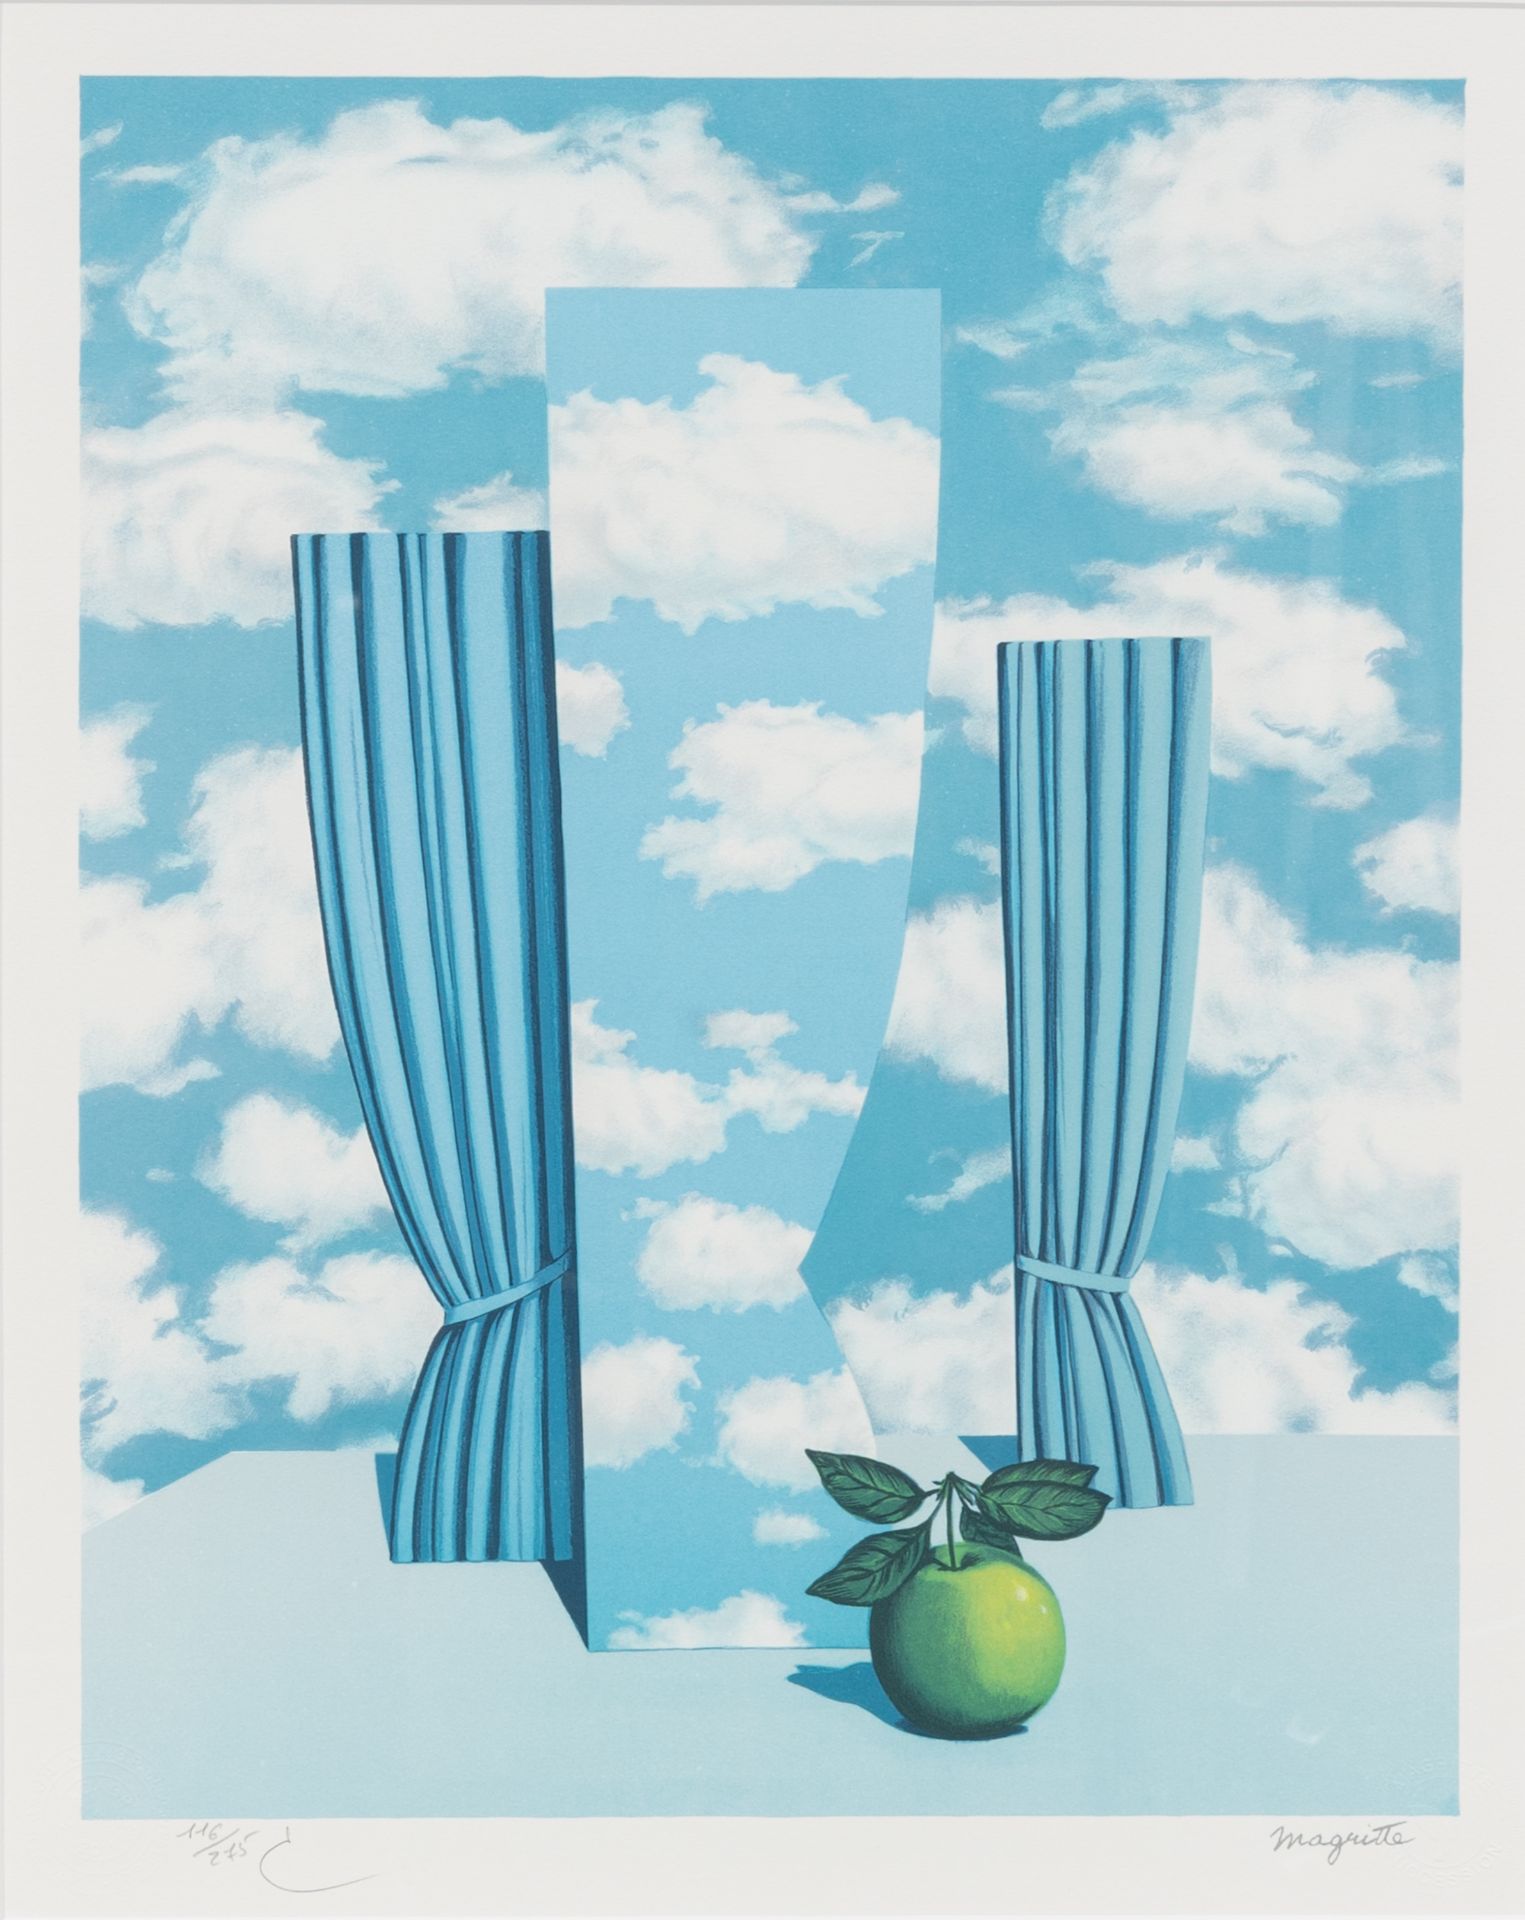 Rene Magritte (1898-1967, after): 'Le beau monde', lithograph in colours, ed. 116/275, dated 2010